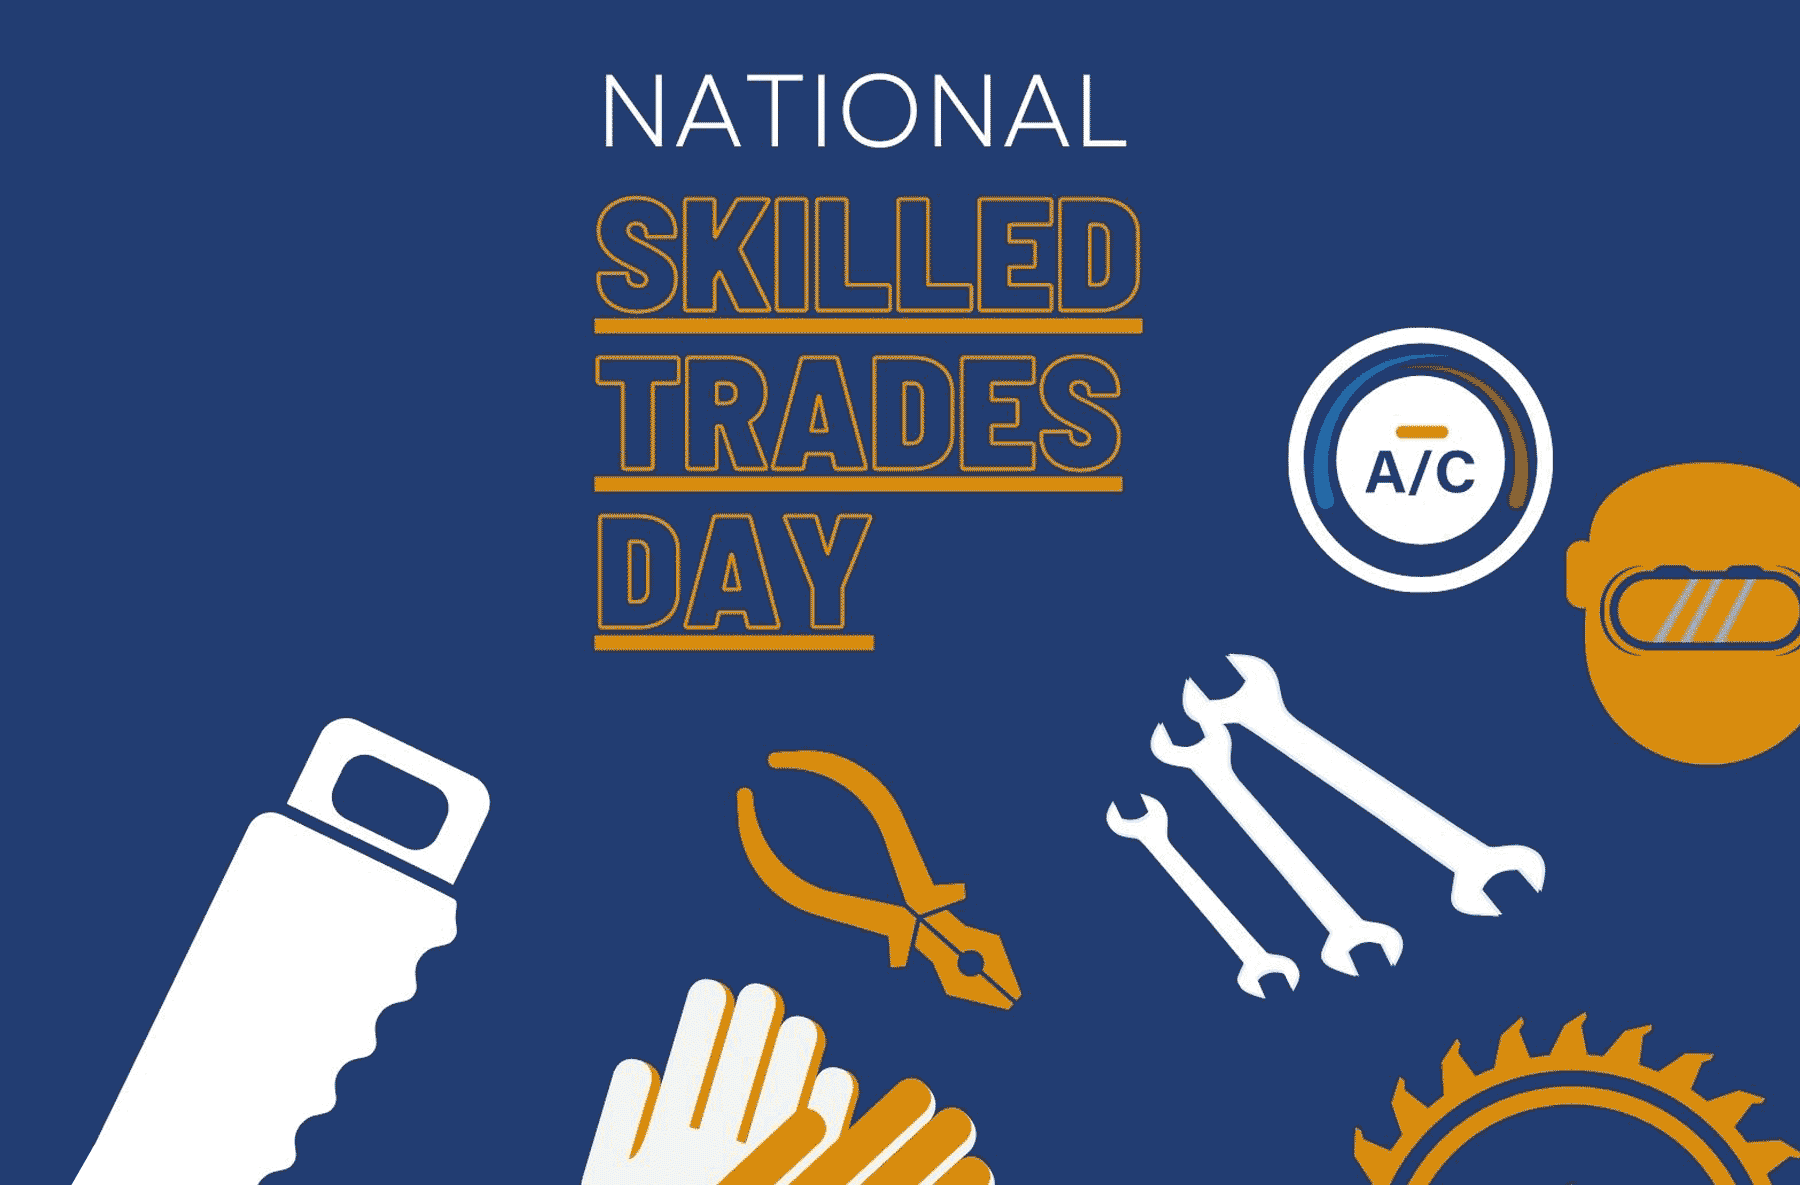 National Skilled Trades Day